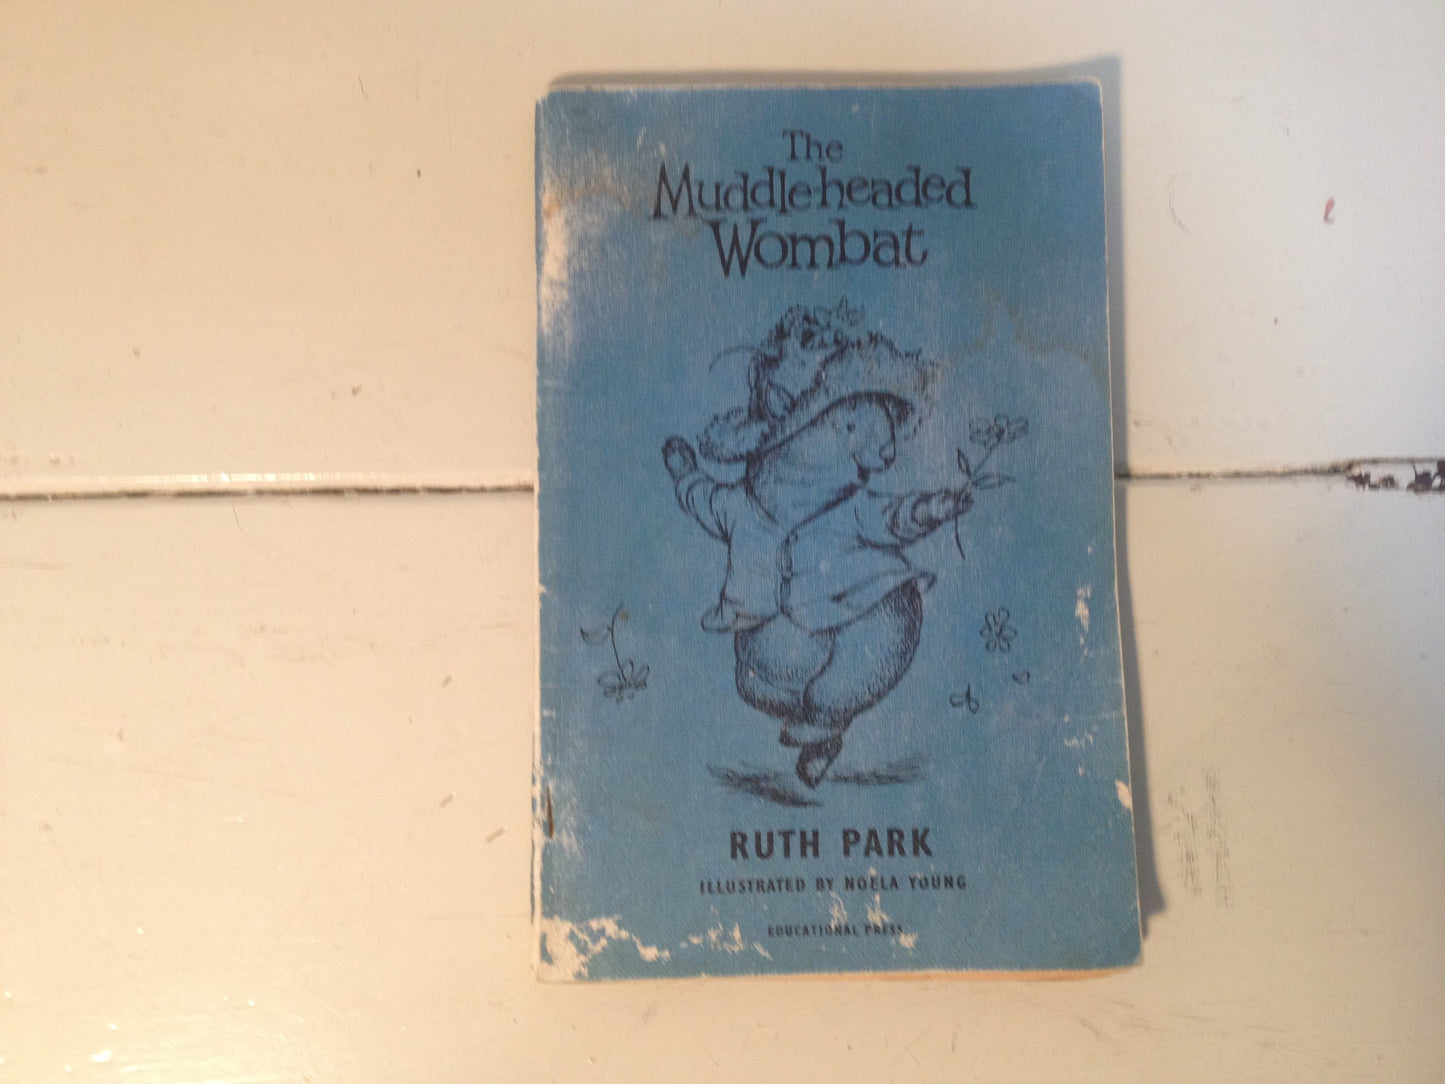 The Muddle-headed Wombat by Ruth Park